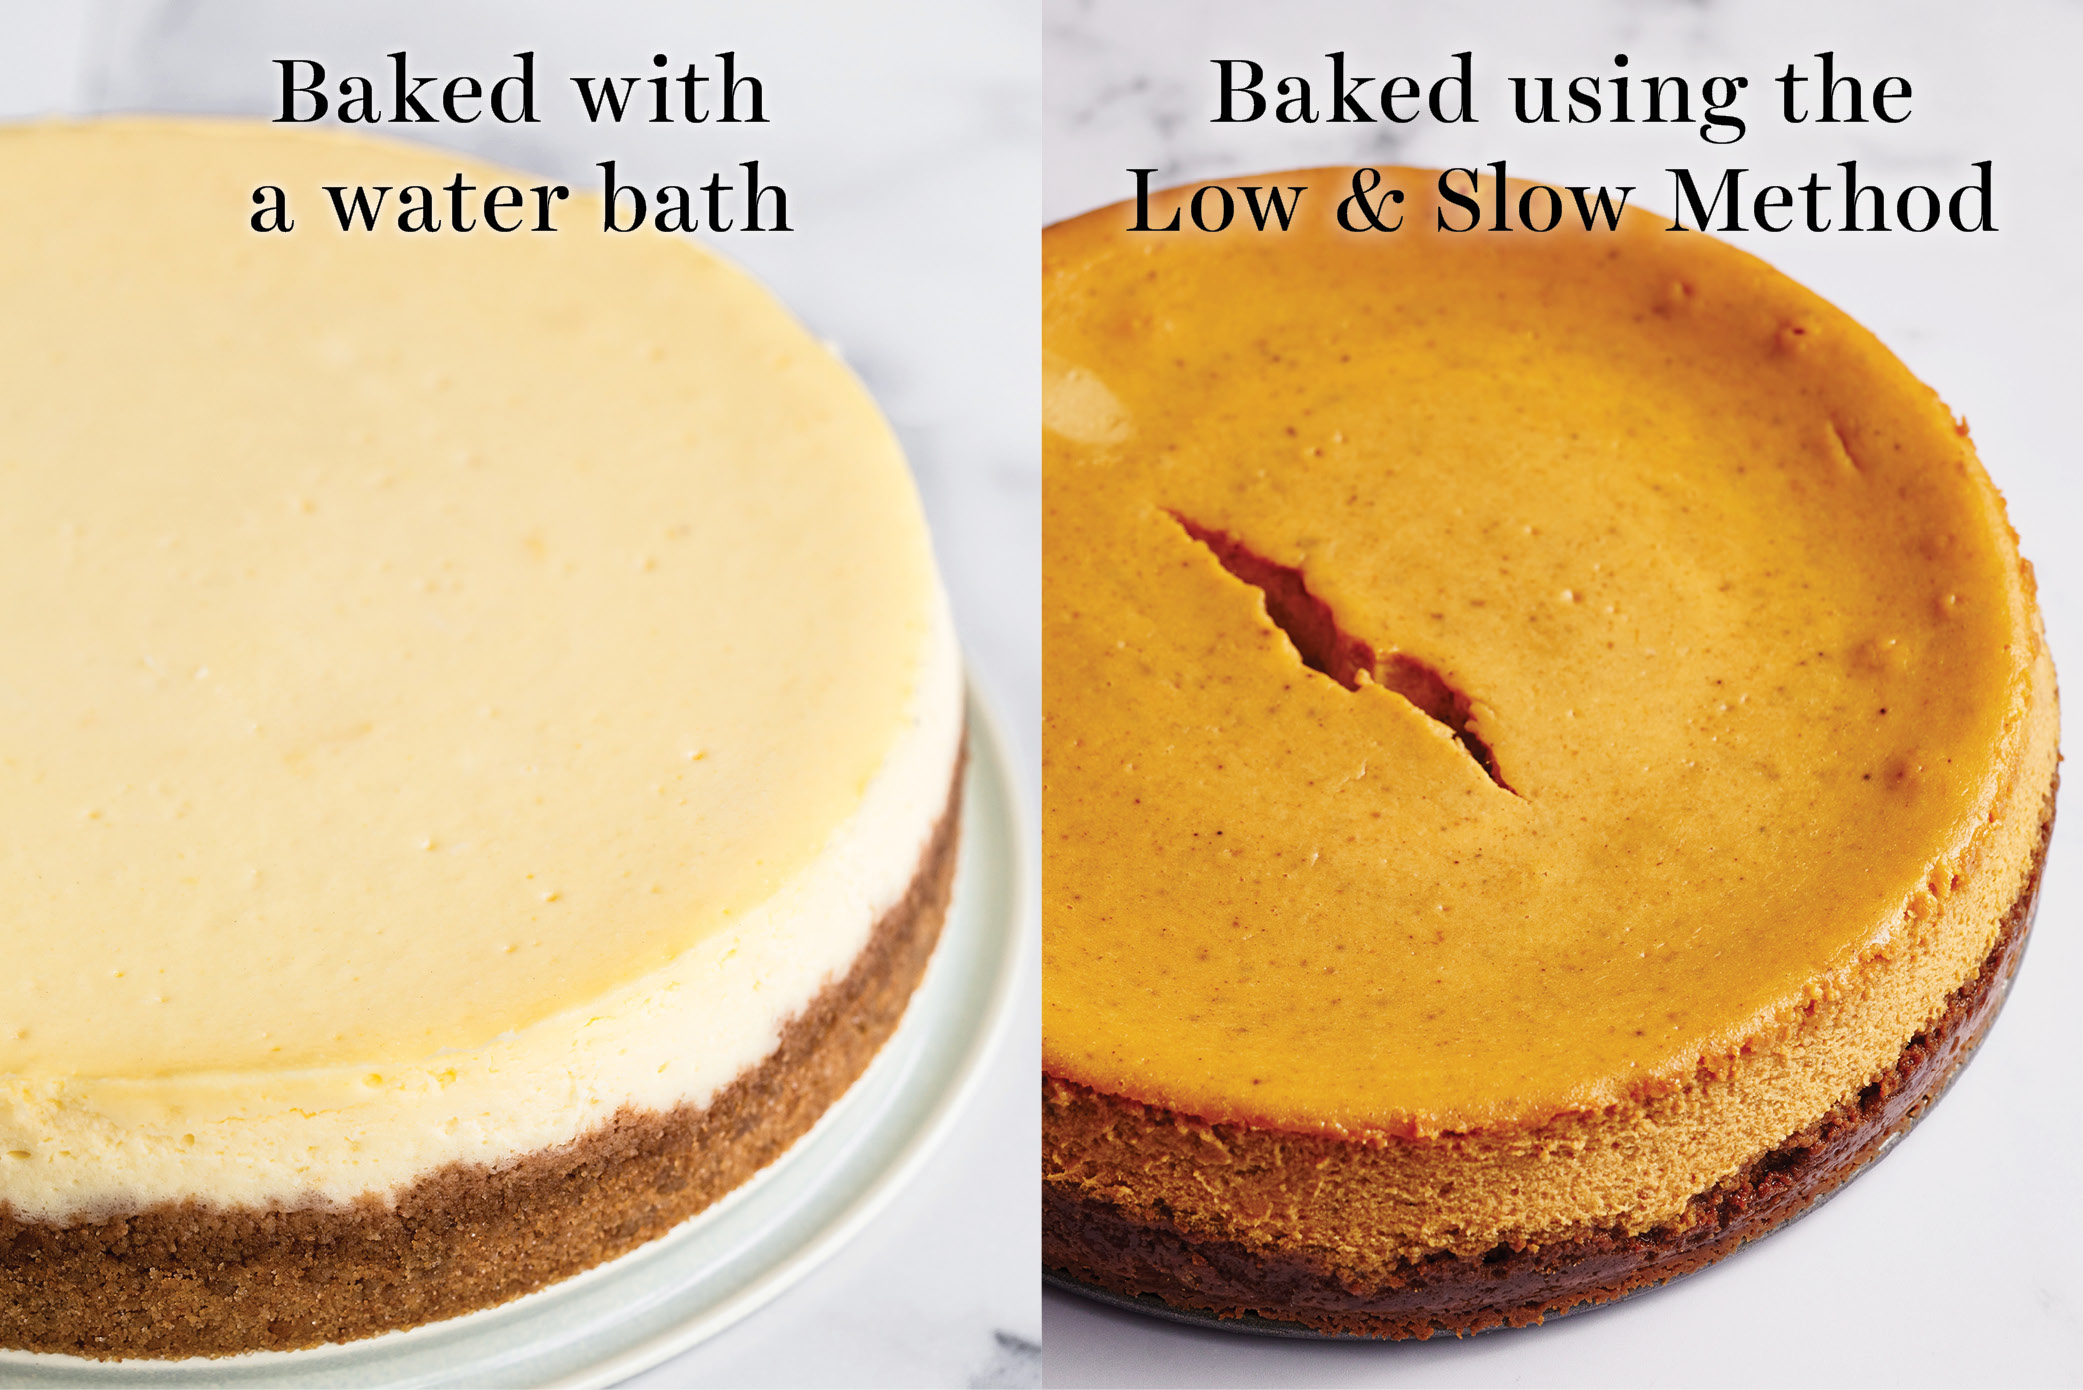 side by side comparison of a cheesecake baked in a water bath, vs another cheesecake baked without a water bath